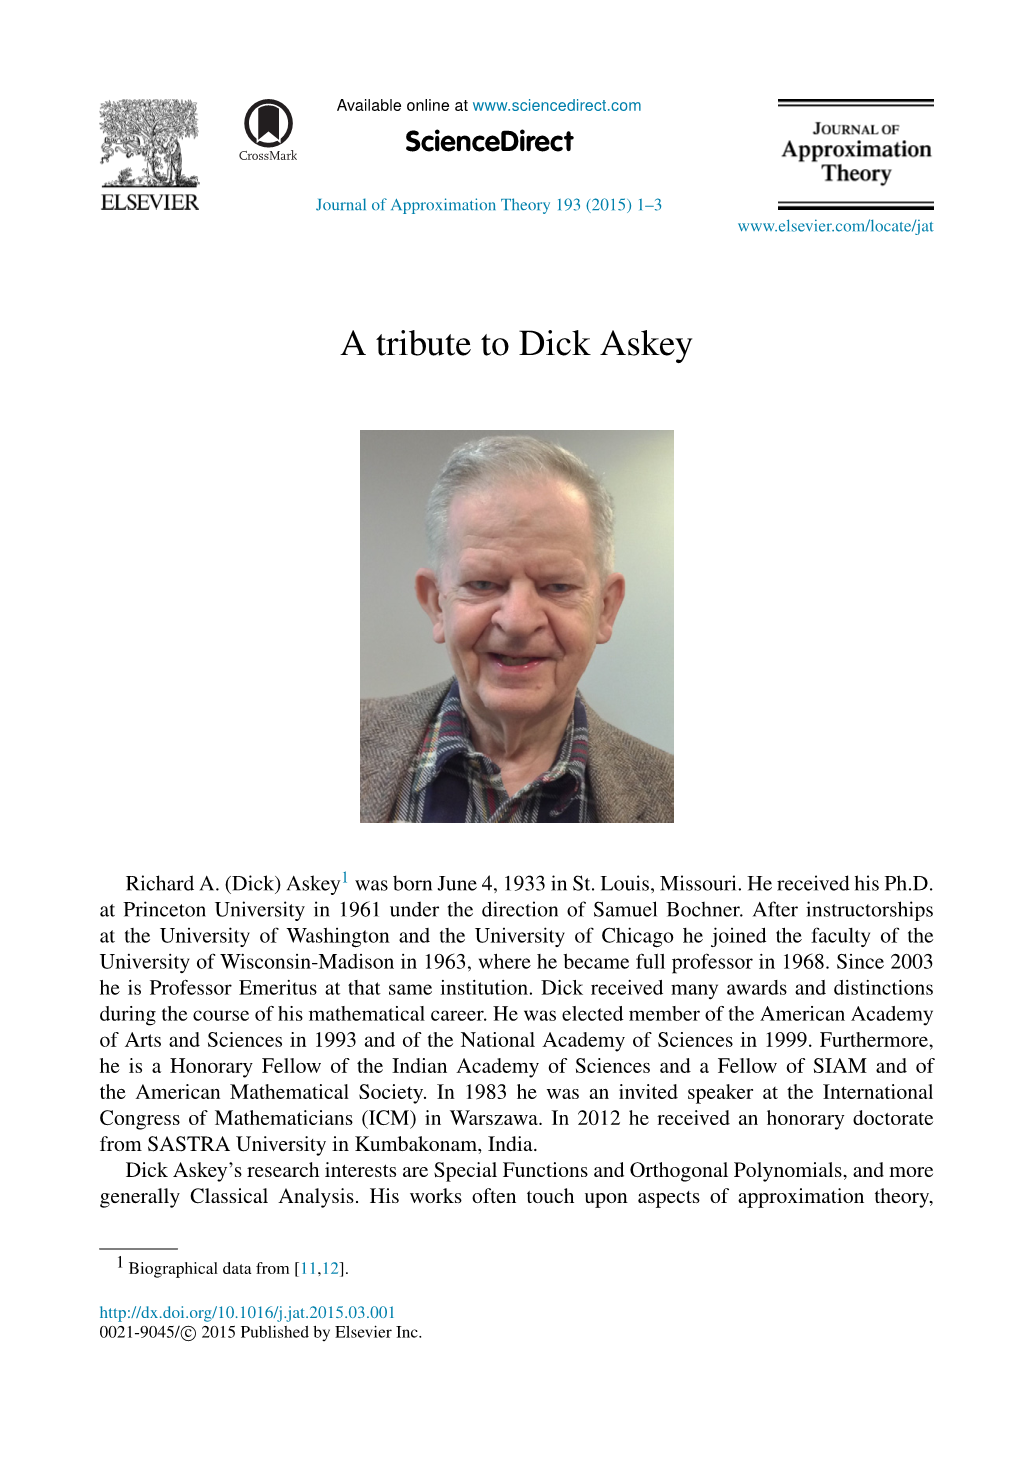 A Tribute to Dick Askey